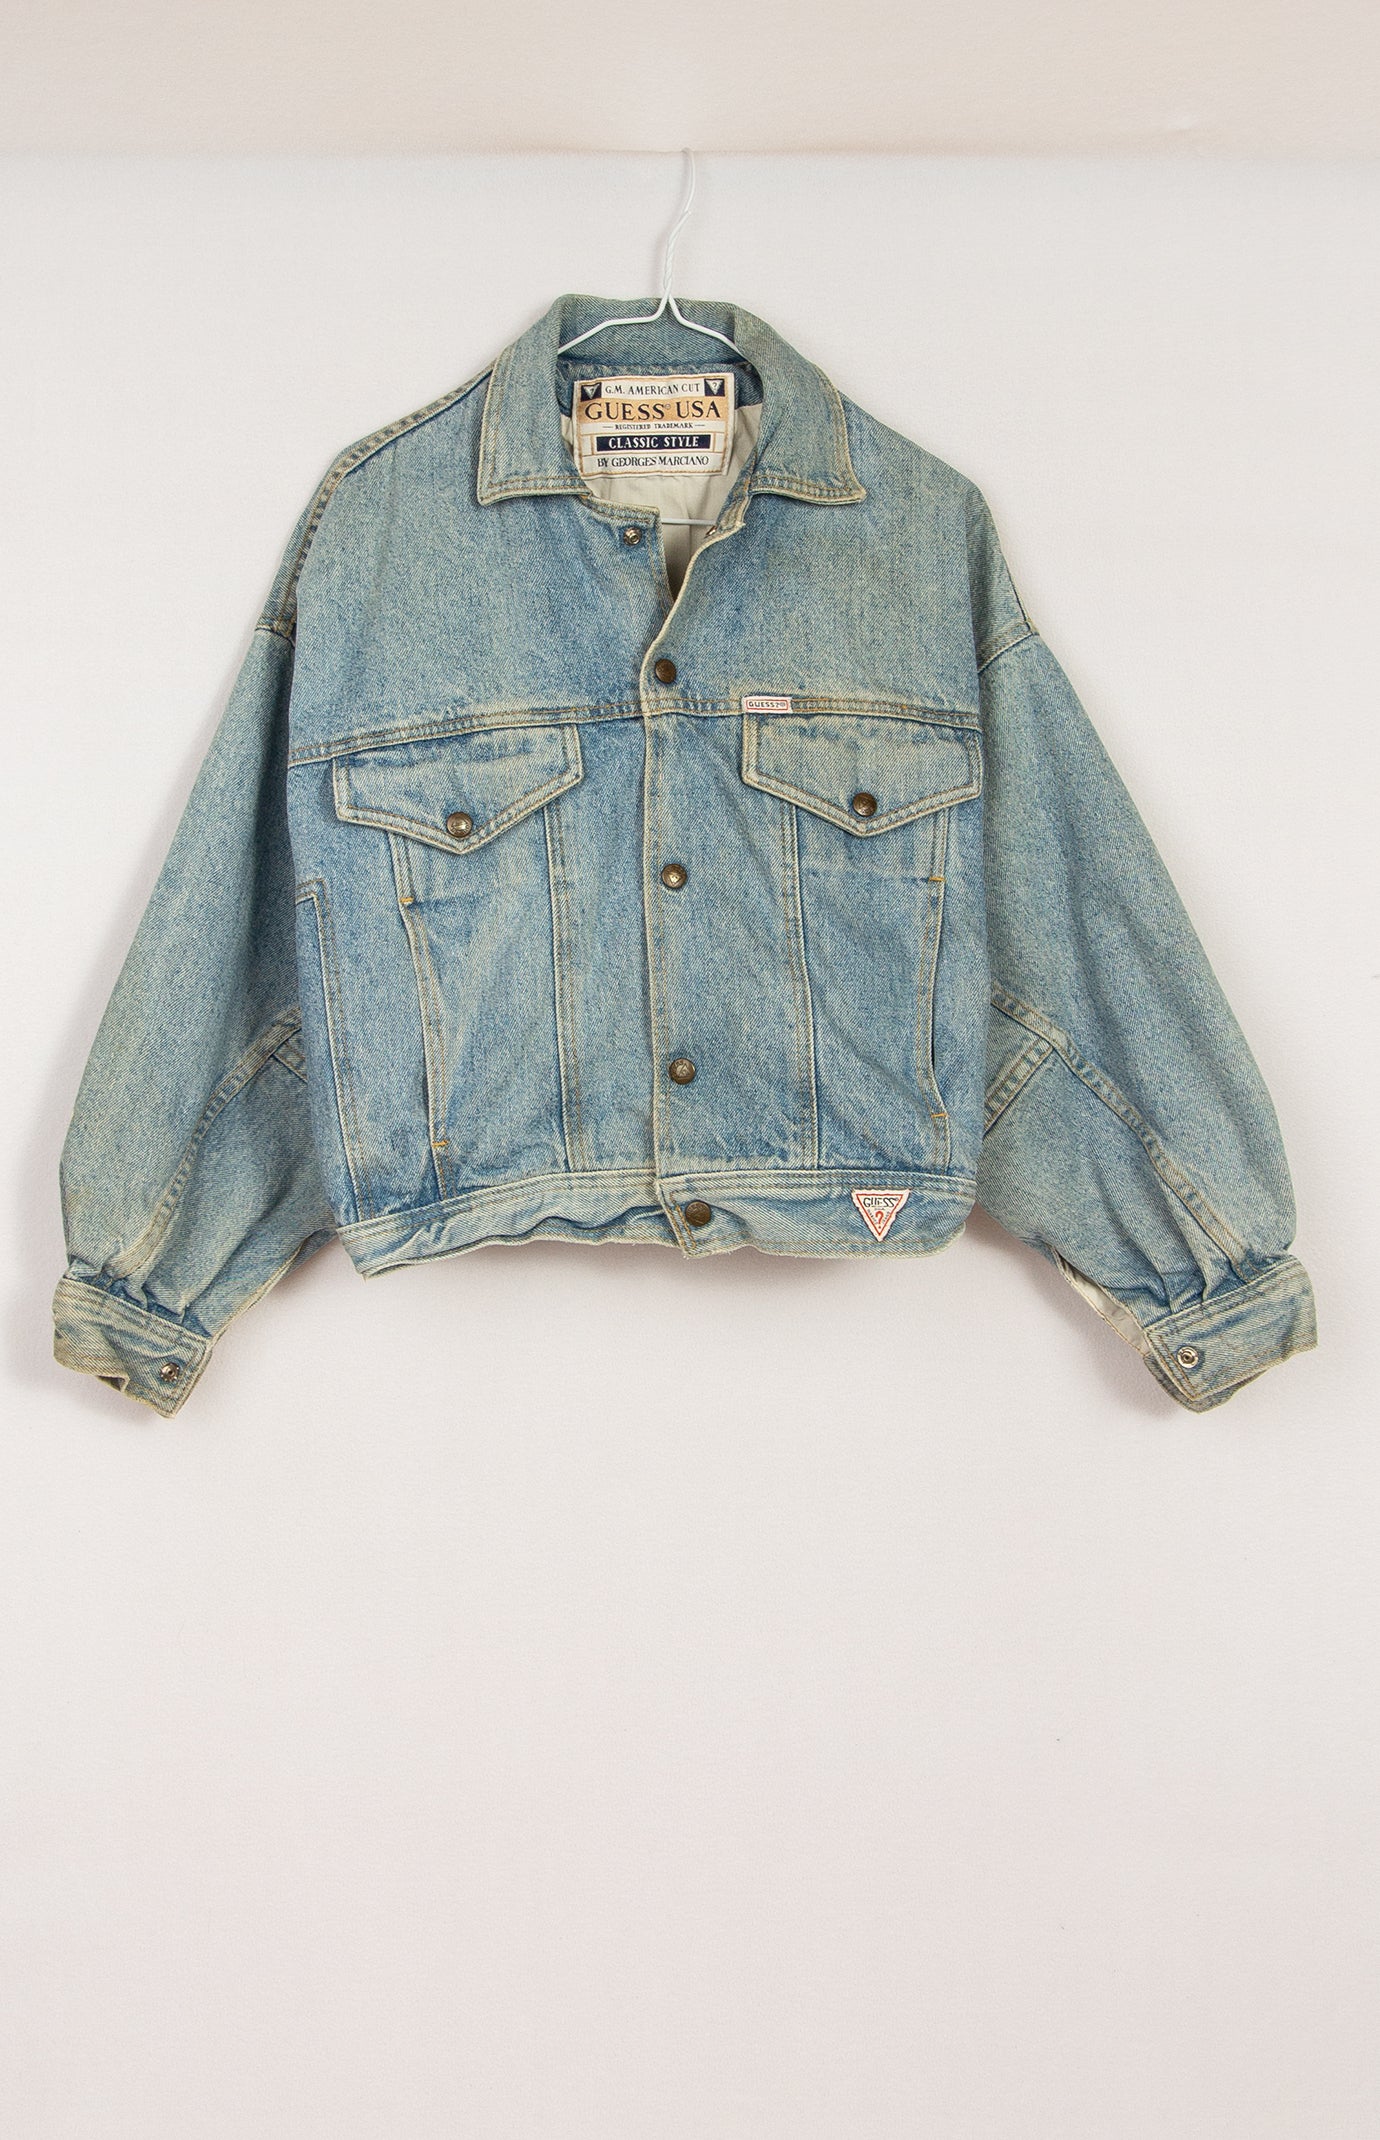 Upcycled Vintage Jean Jacket With Patches / Reworked Vintage Jean